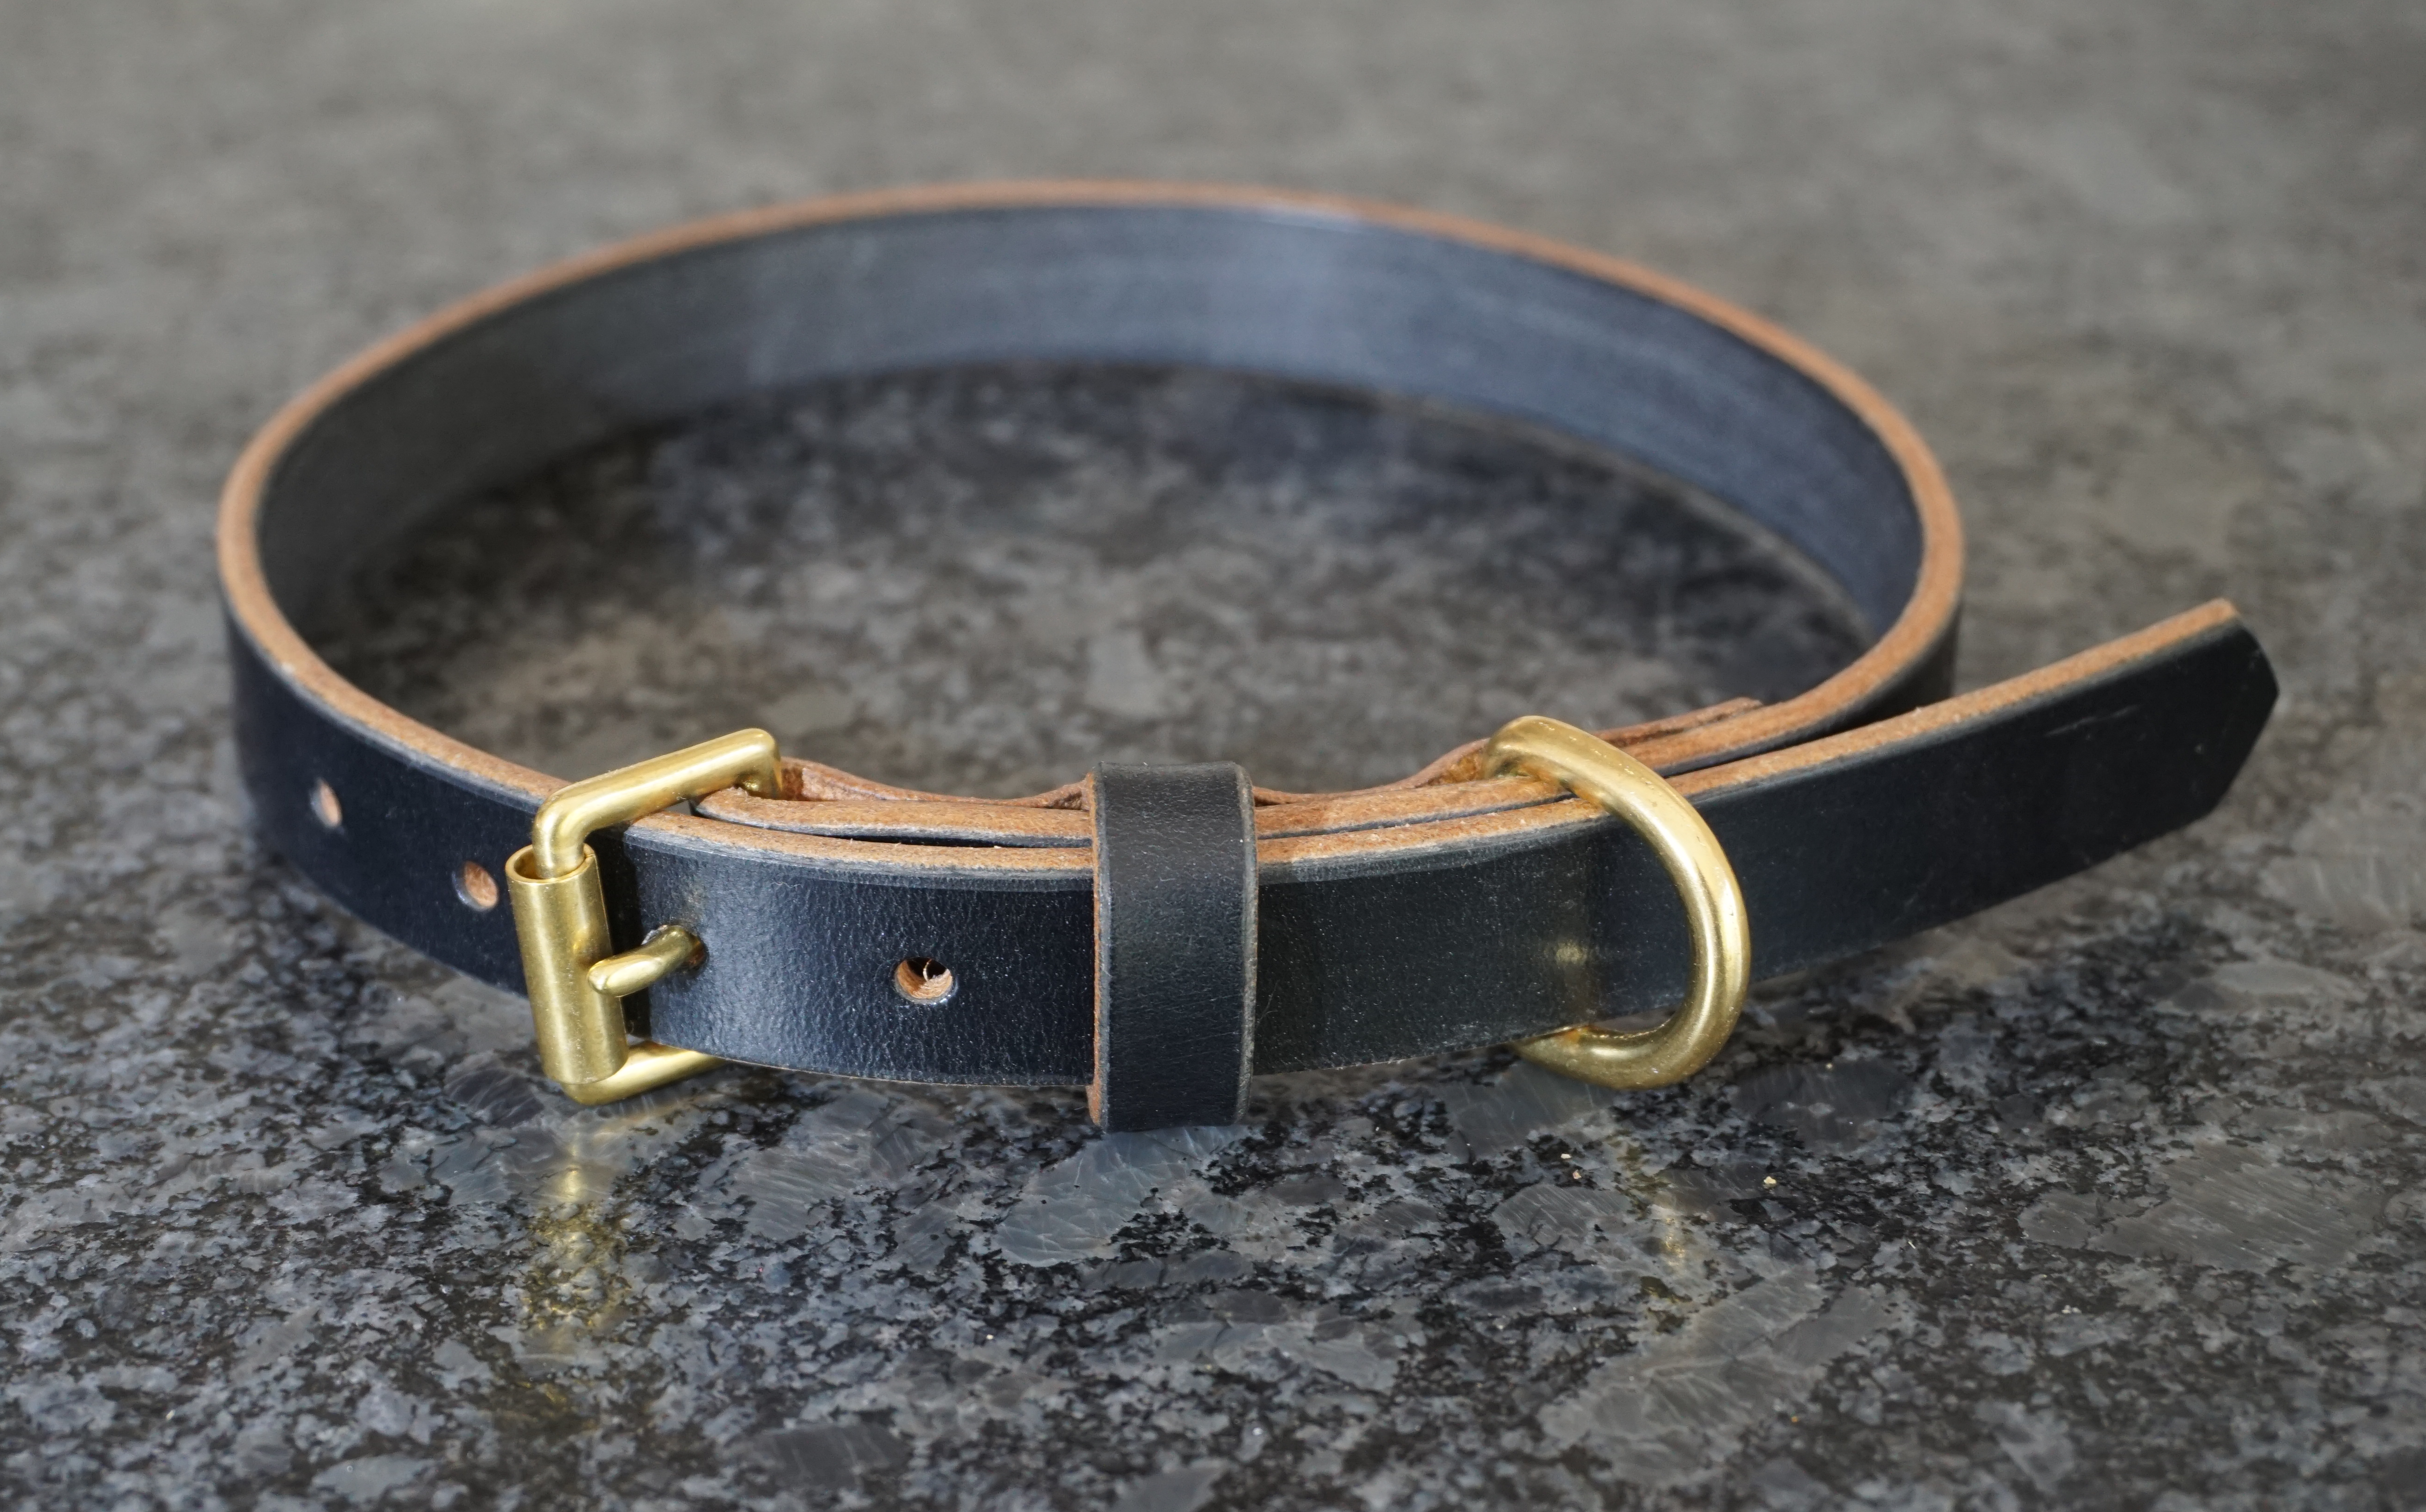 Leather Dog Collar with Brass Fittings